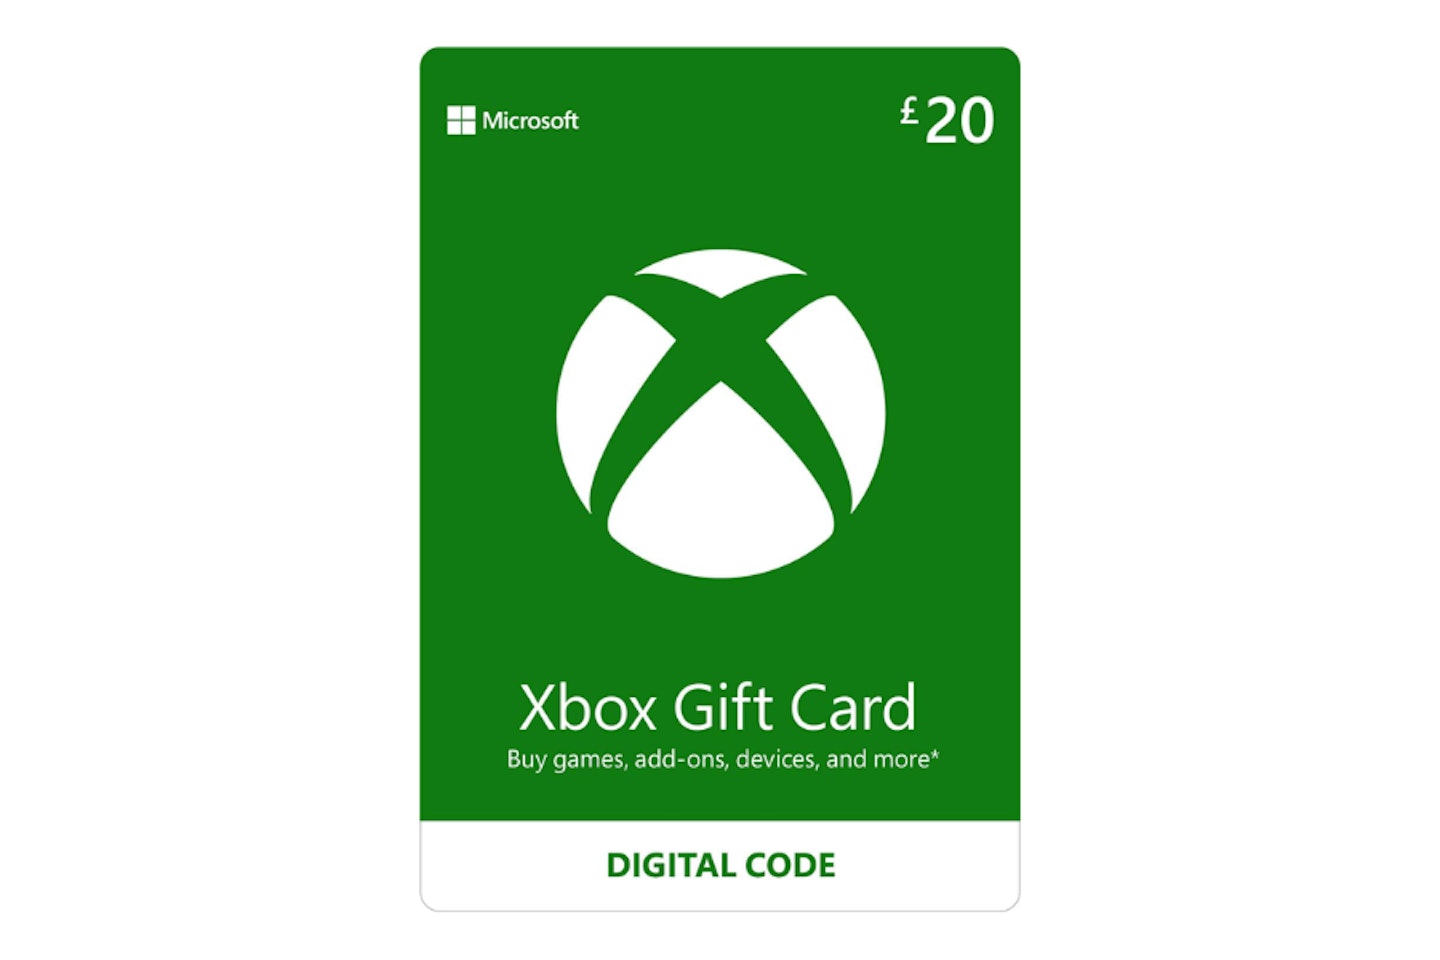 Xbox Gift Cards - one of the best gifts for gamers